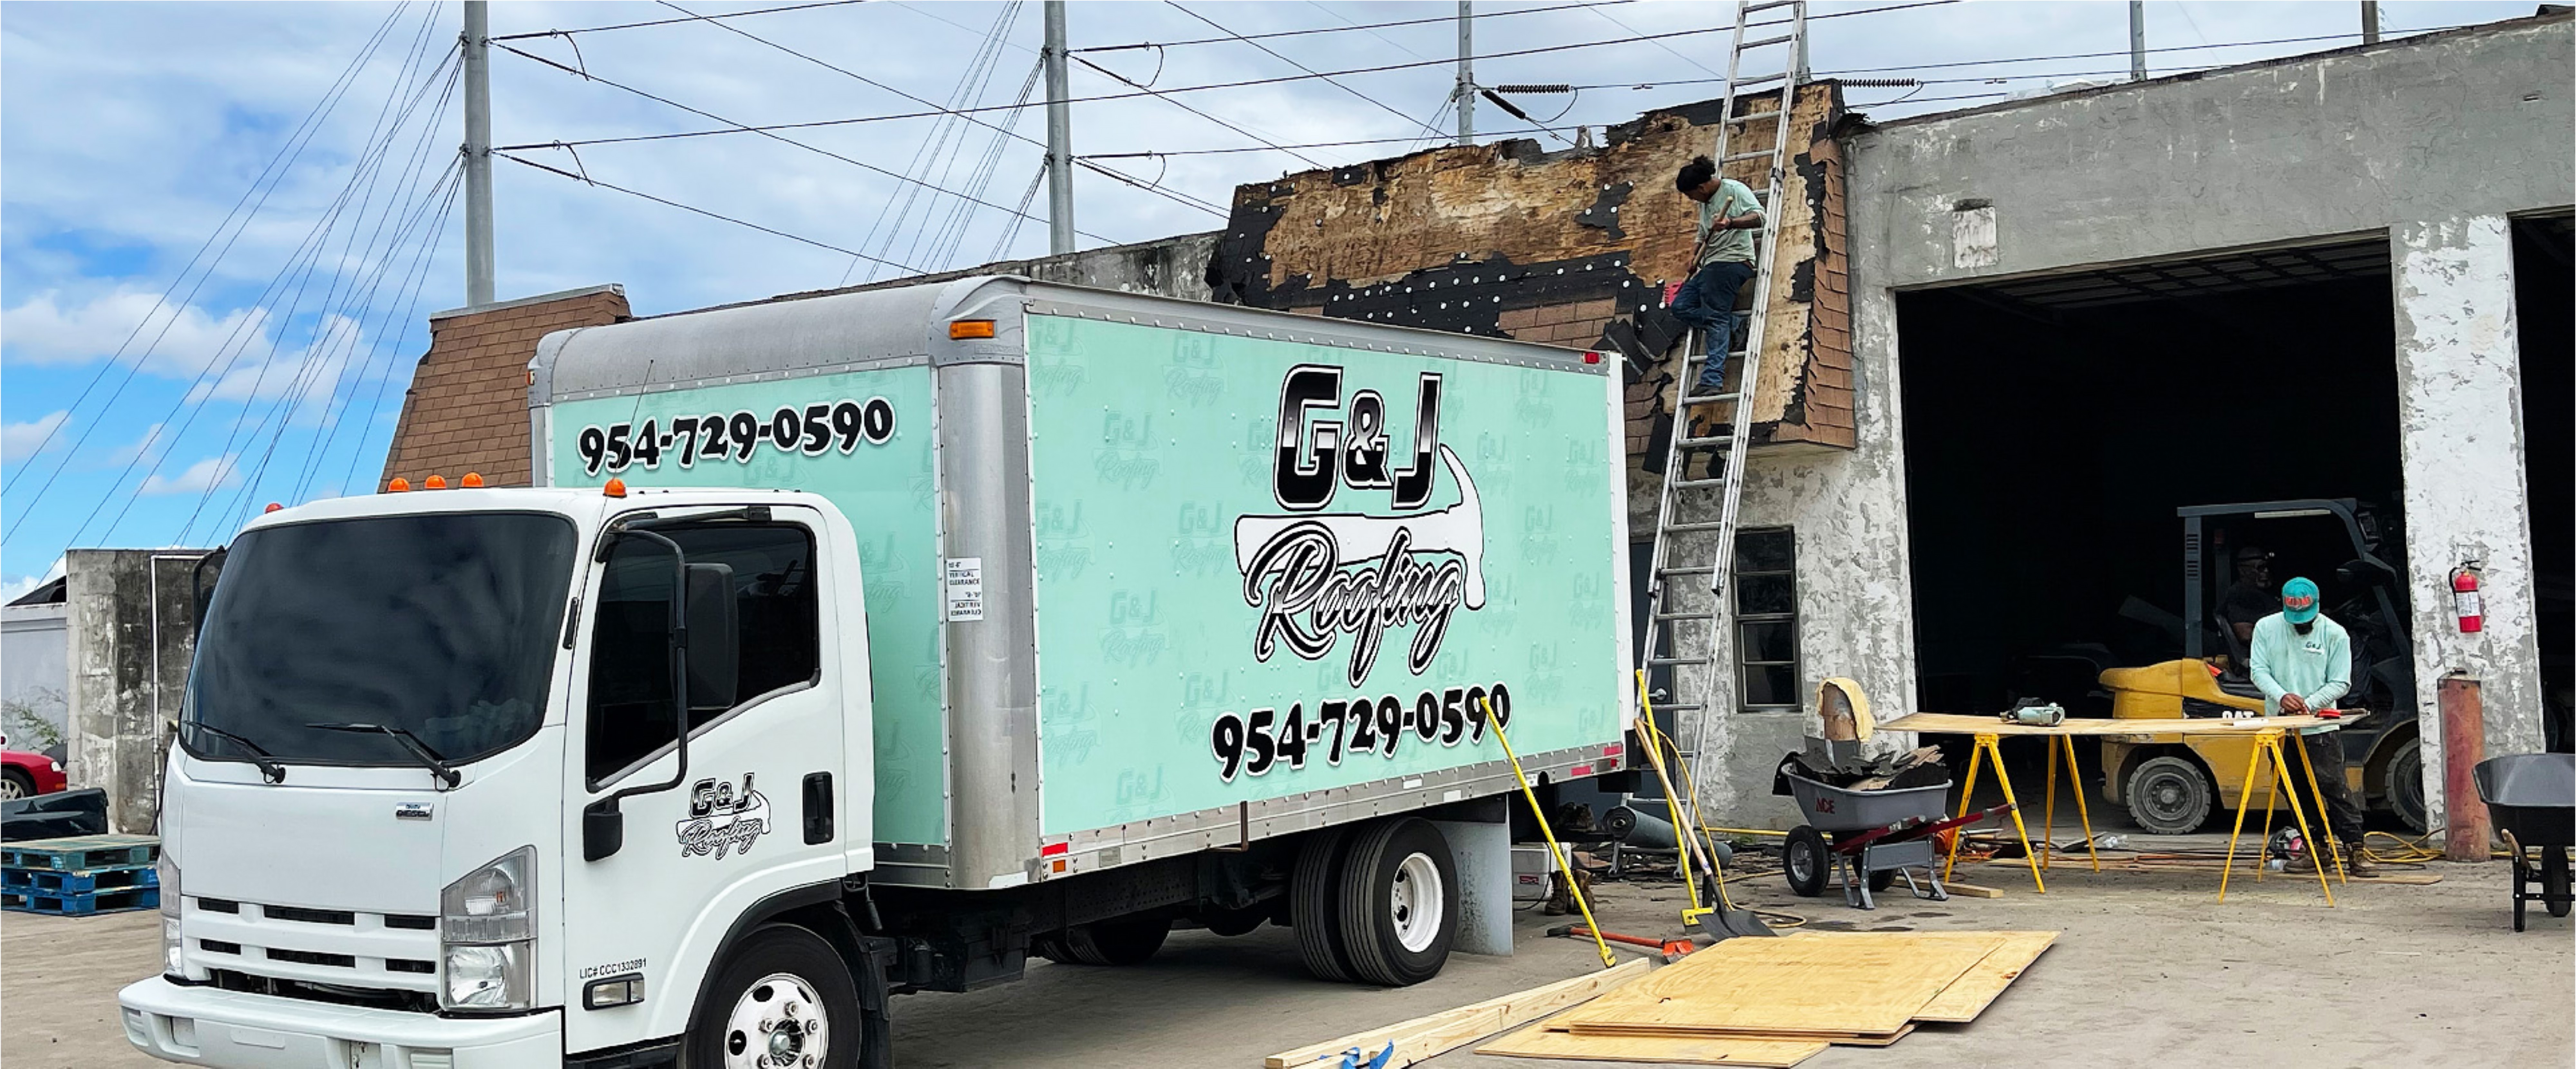 G&J Roofing Commerical Roofing Specialists